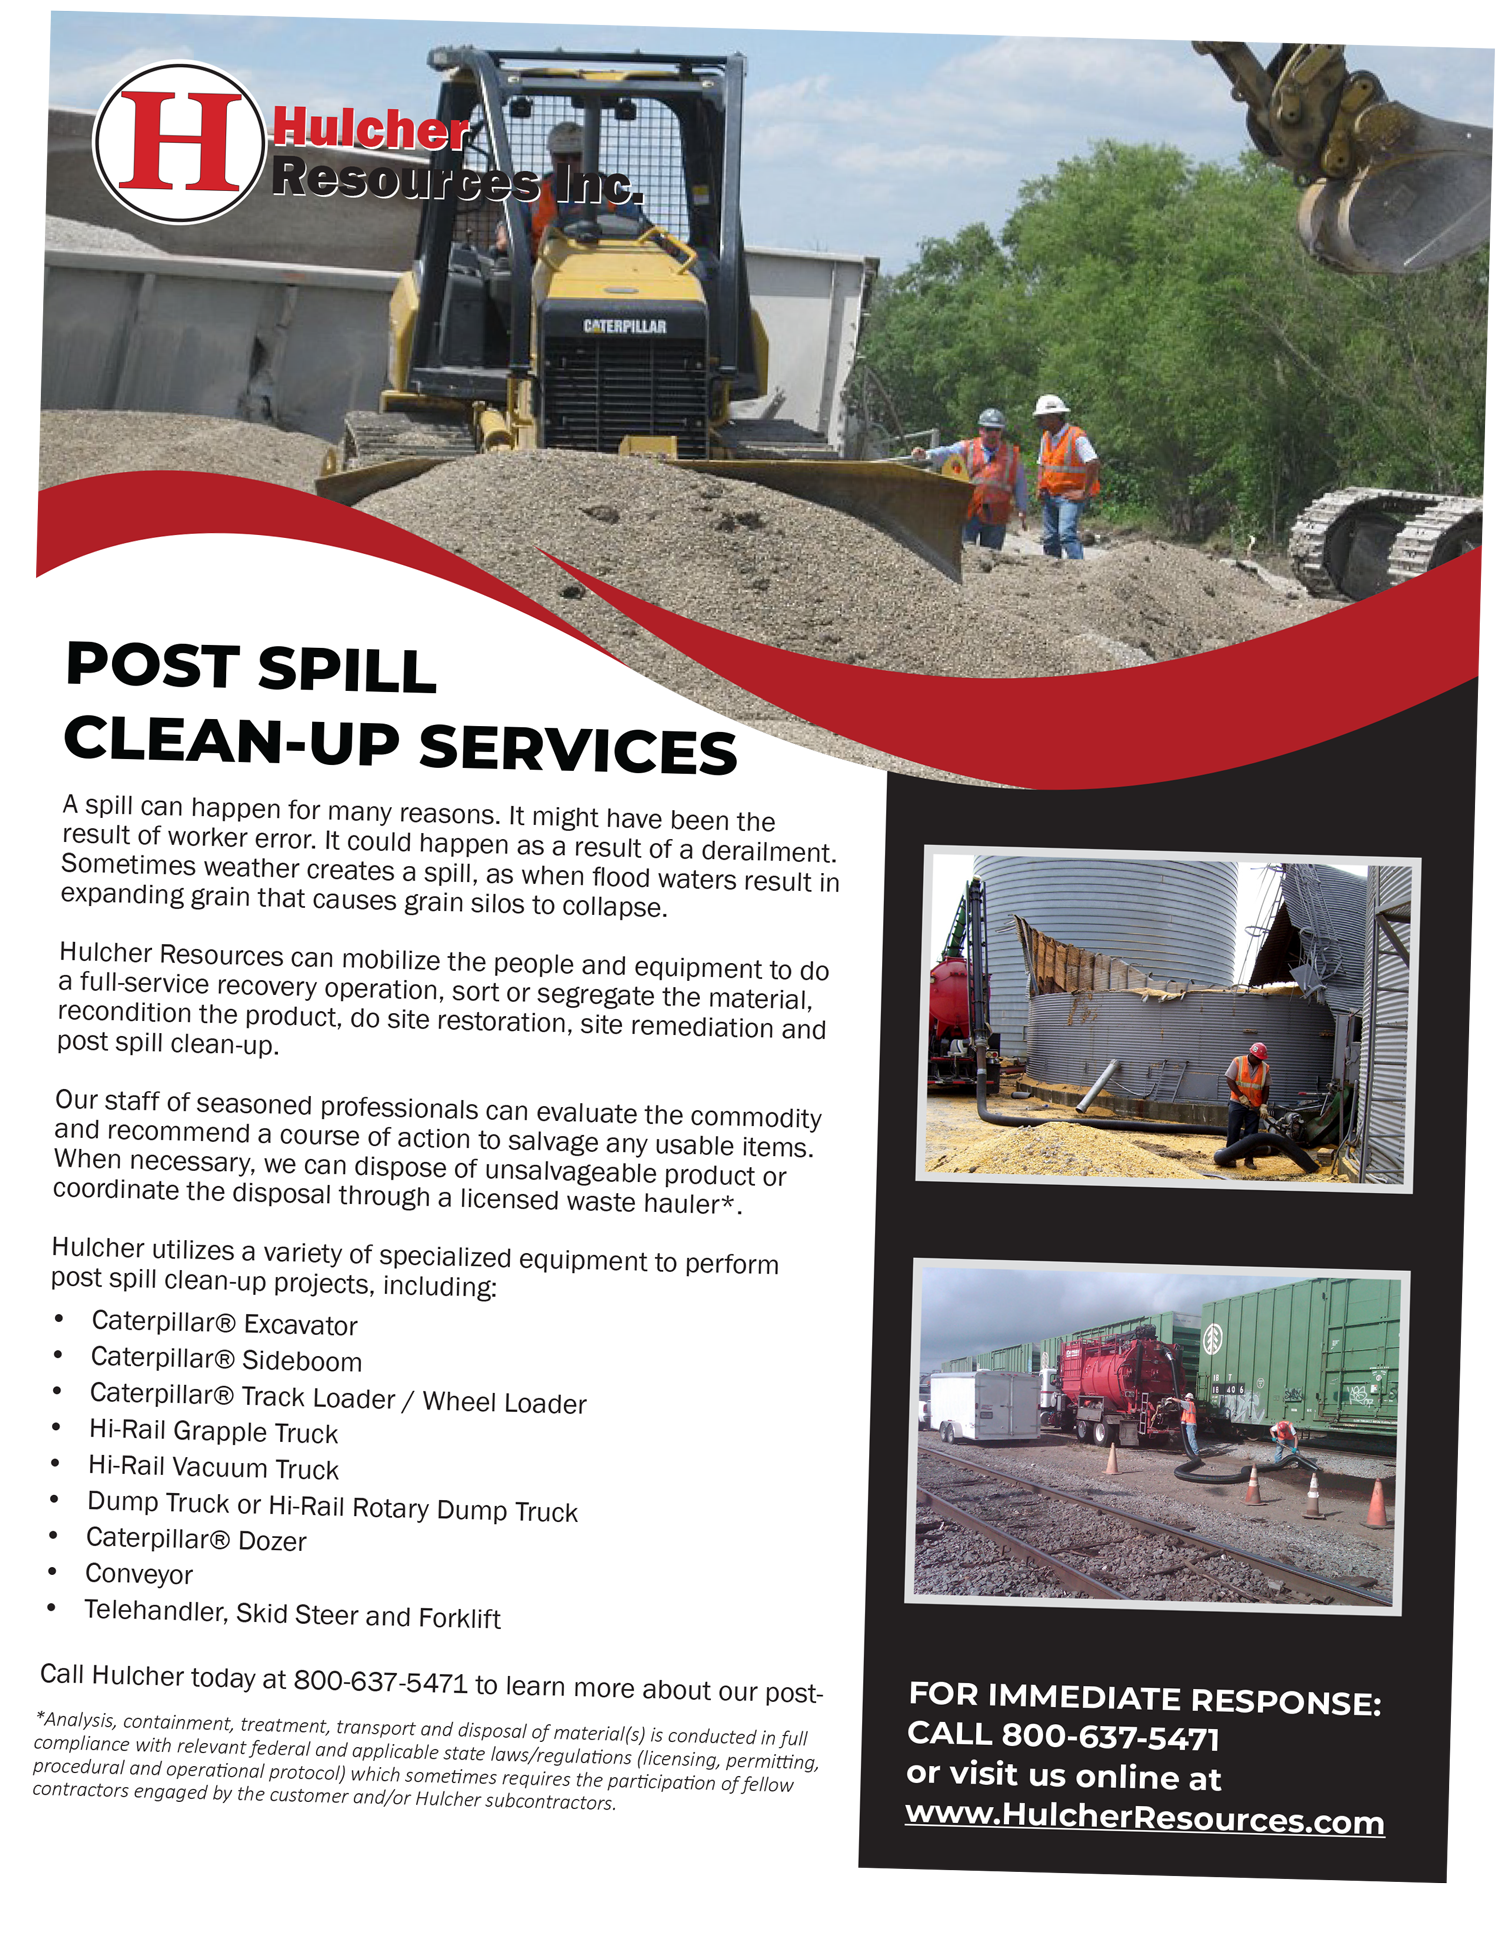 Post Spill Clean-up Services